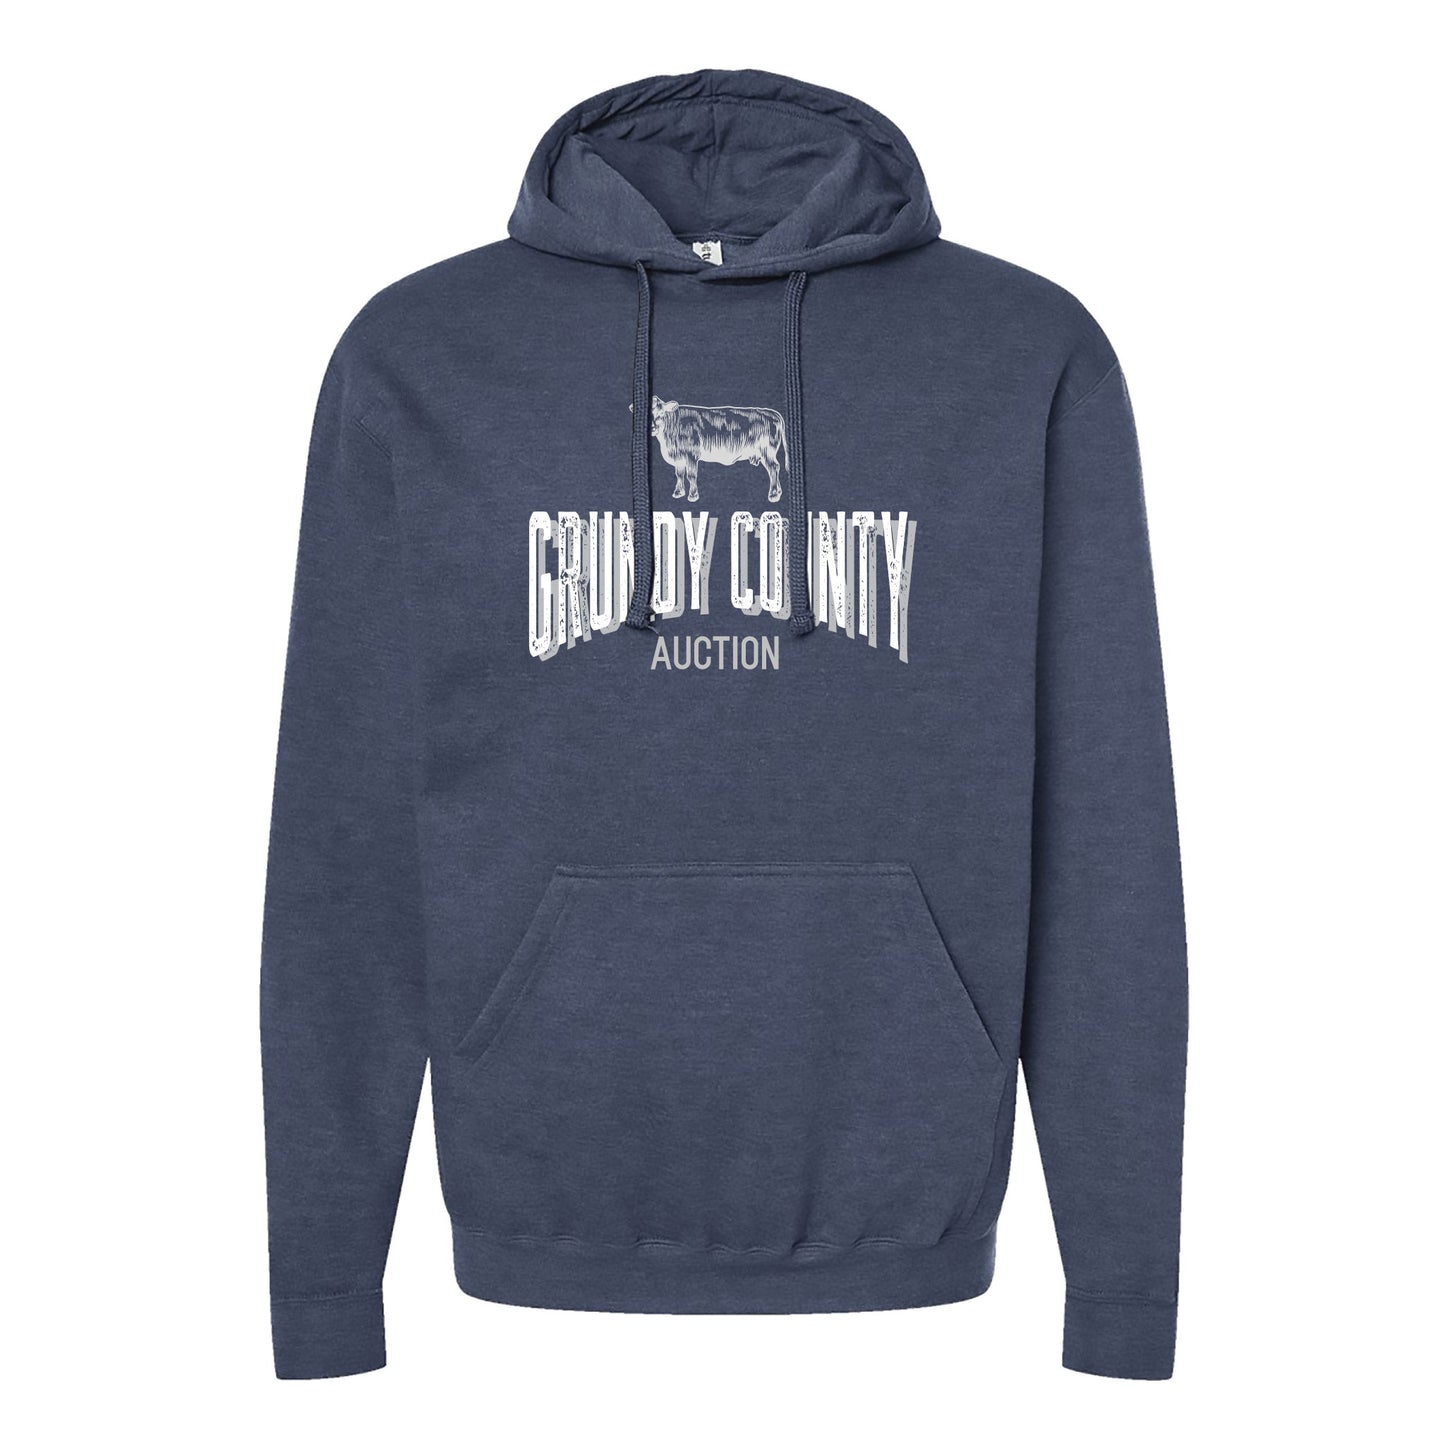 Grundy County Auction Hoodie